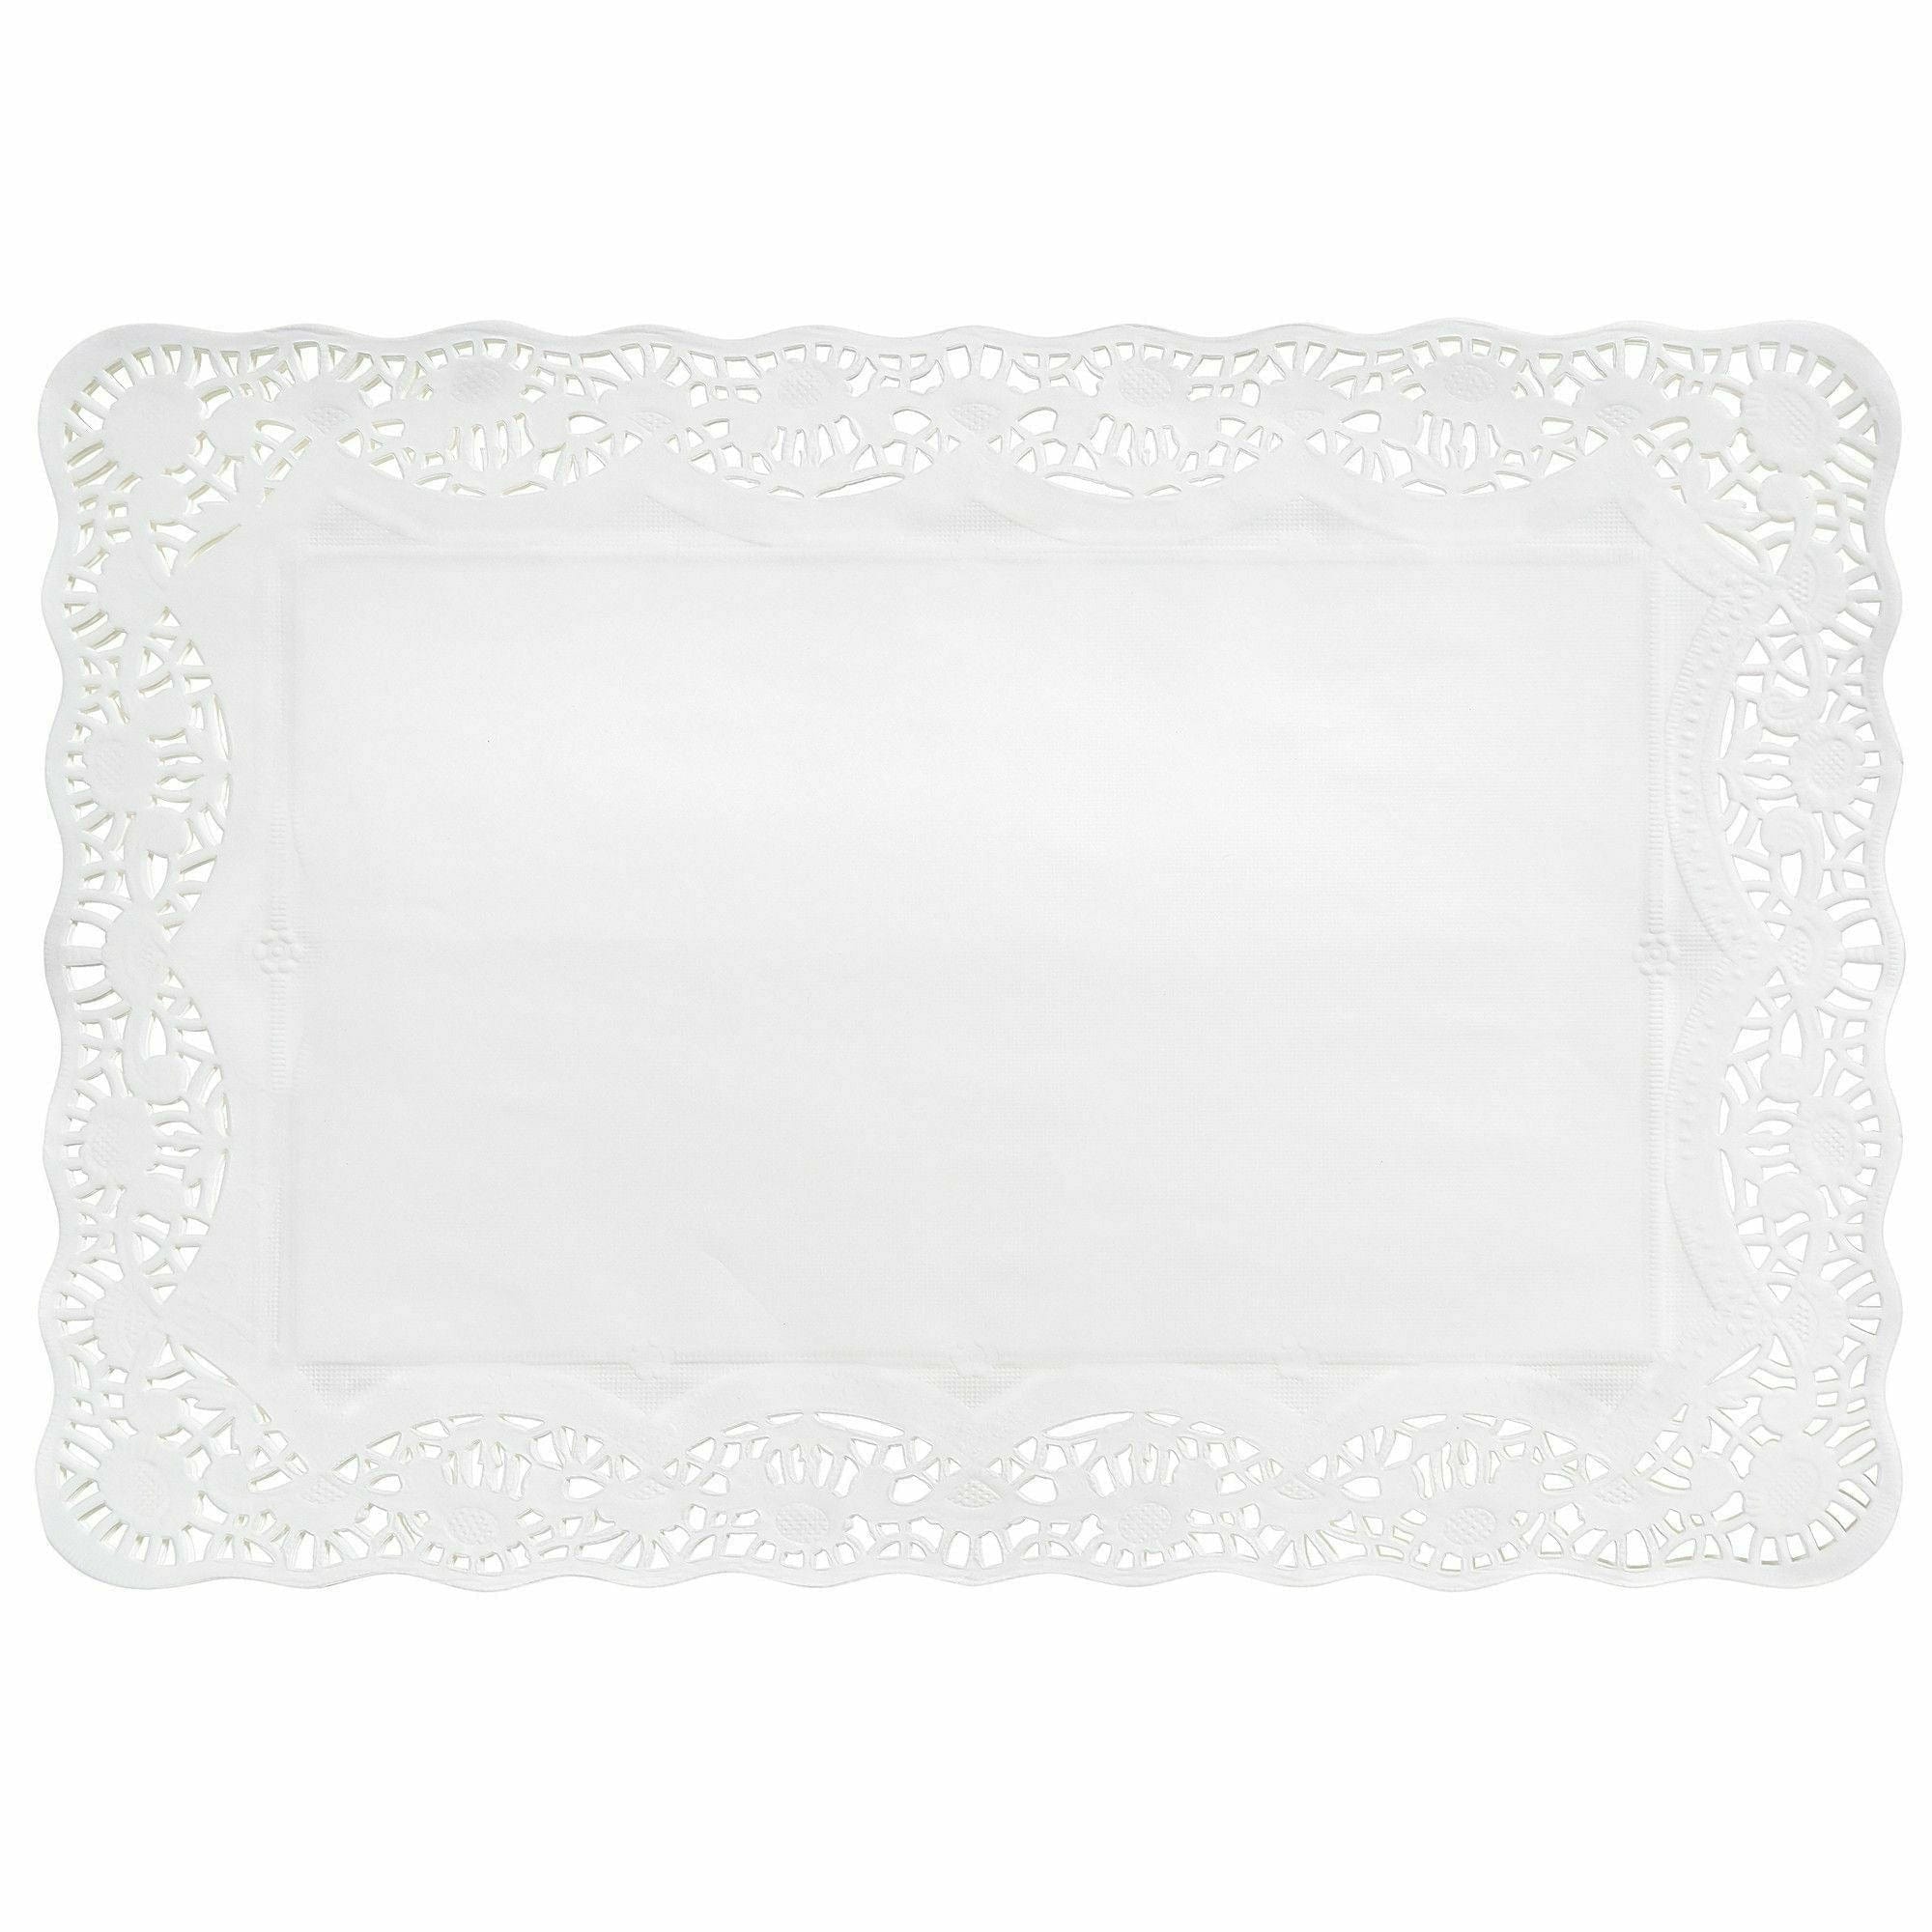 Amscan BASIC White Doily Placemats